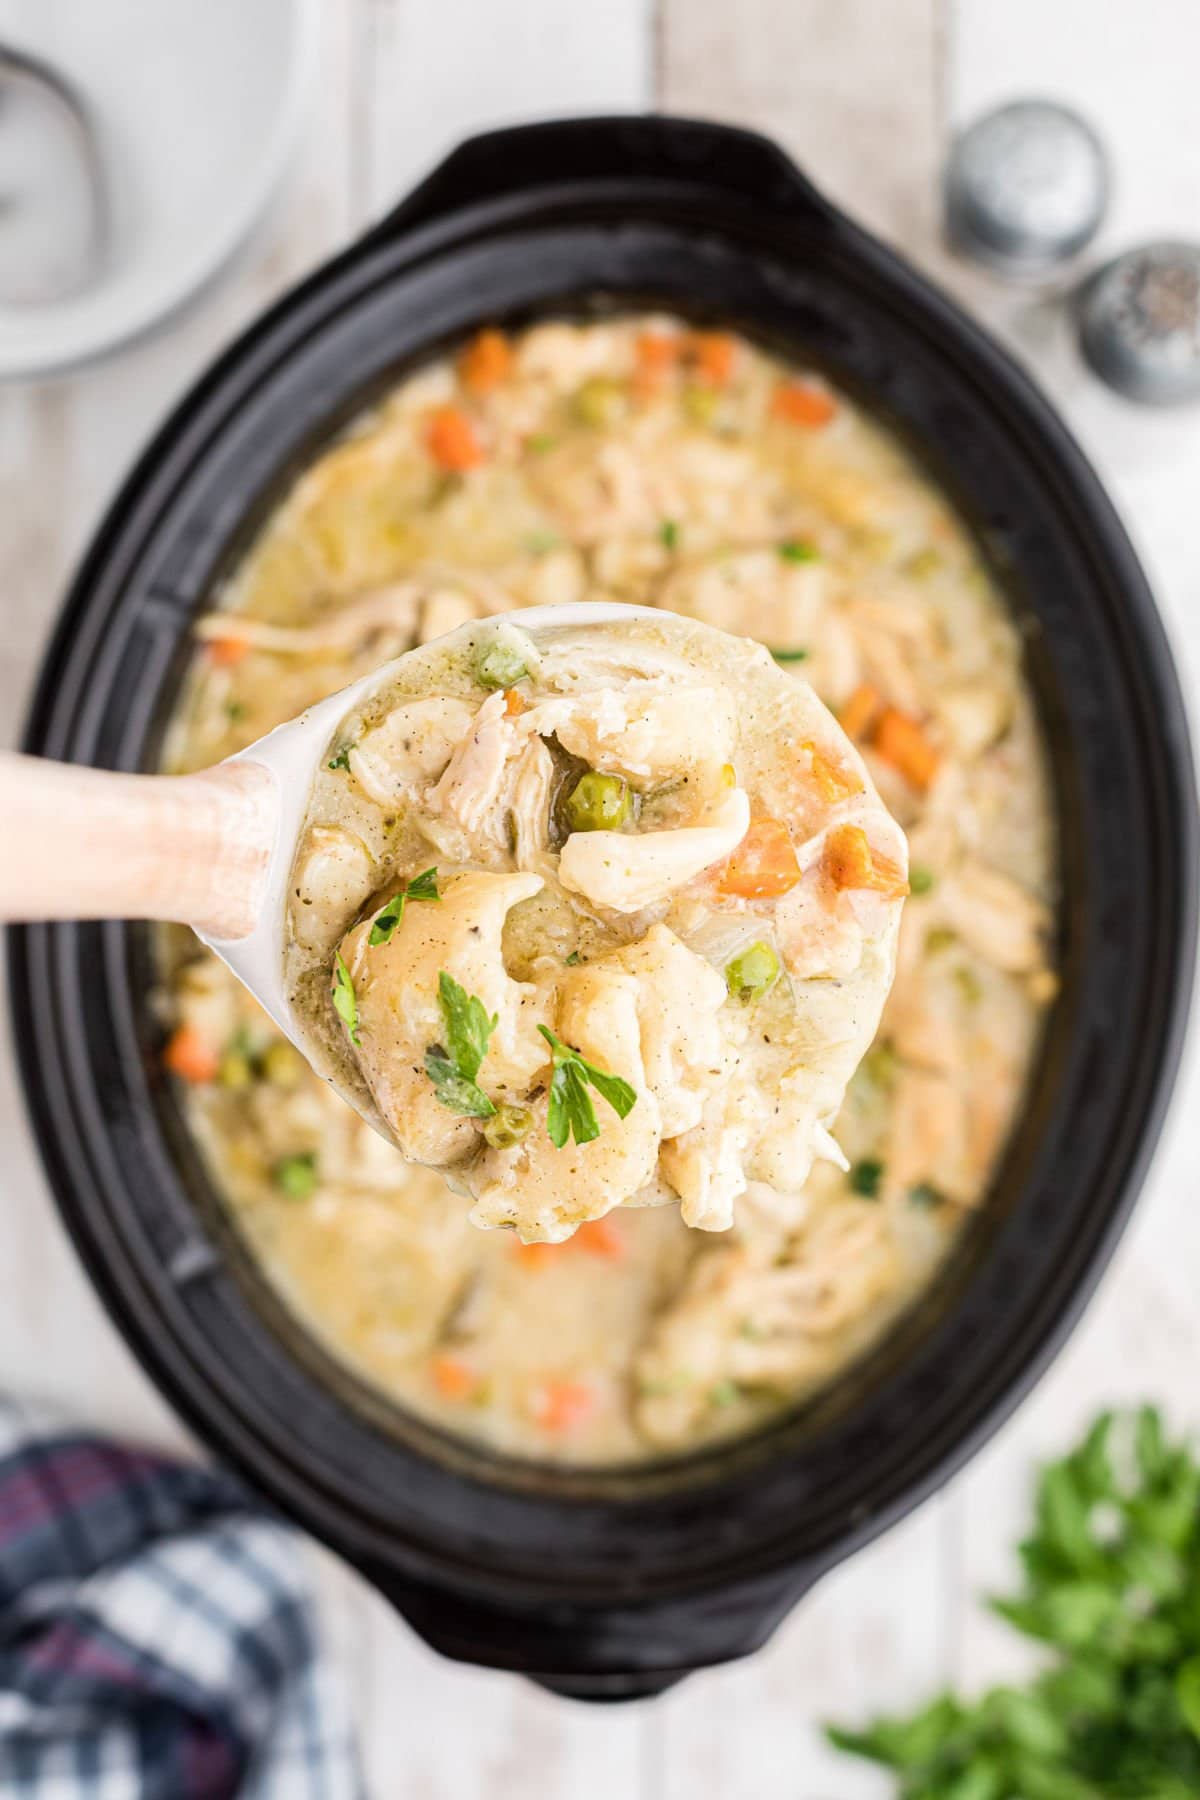 A ladleful of chicken and dumplings being removed from a slow cooker.